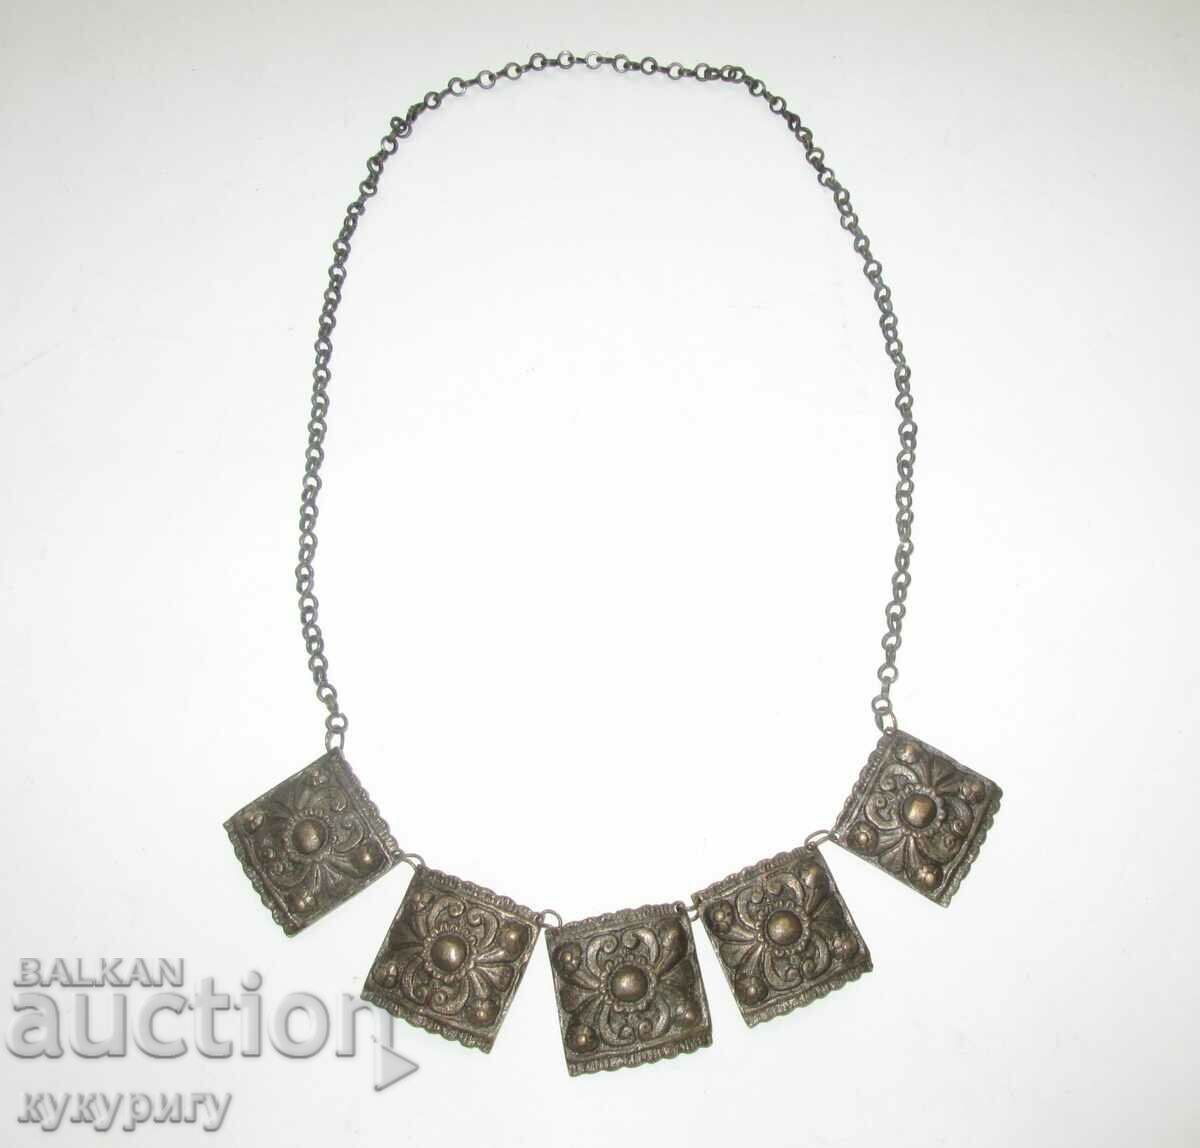 Women's jewelry necklace necklace necklace for costume folklore